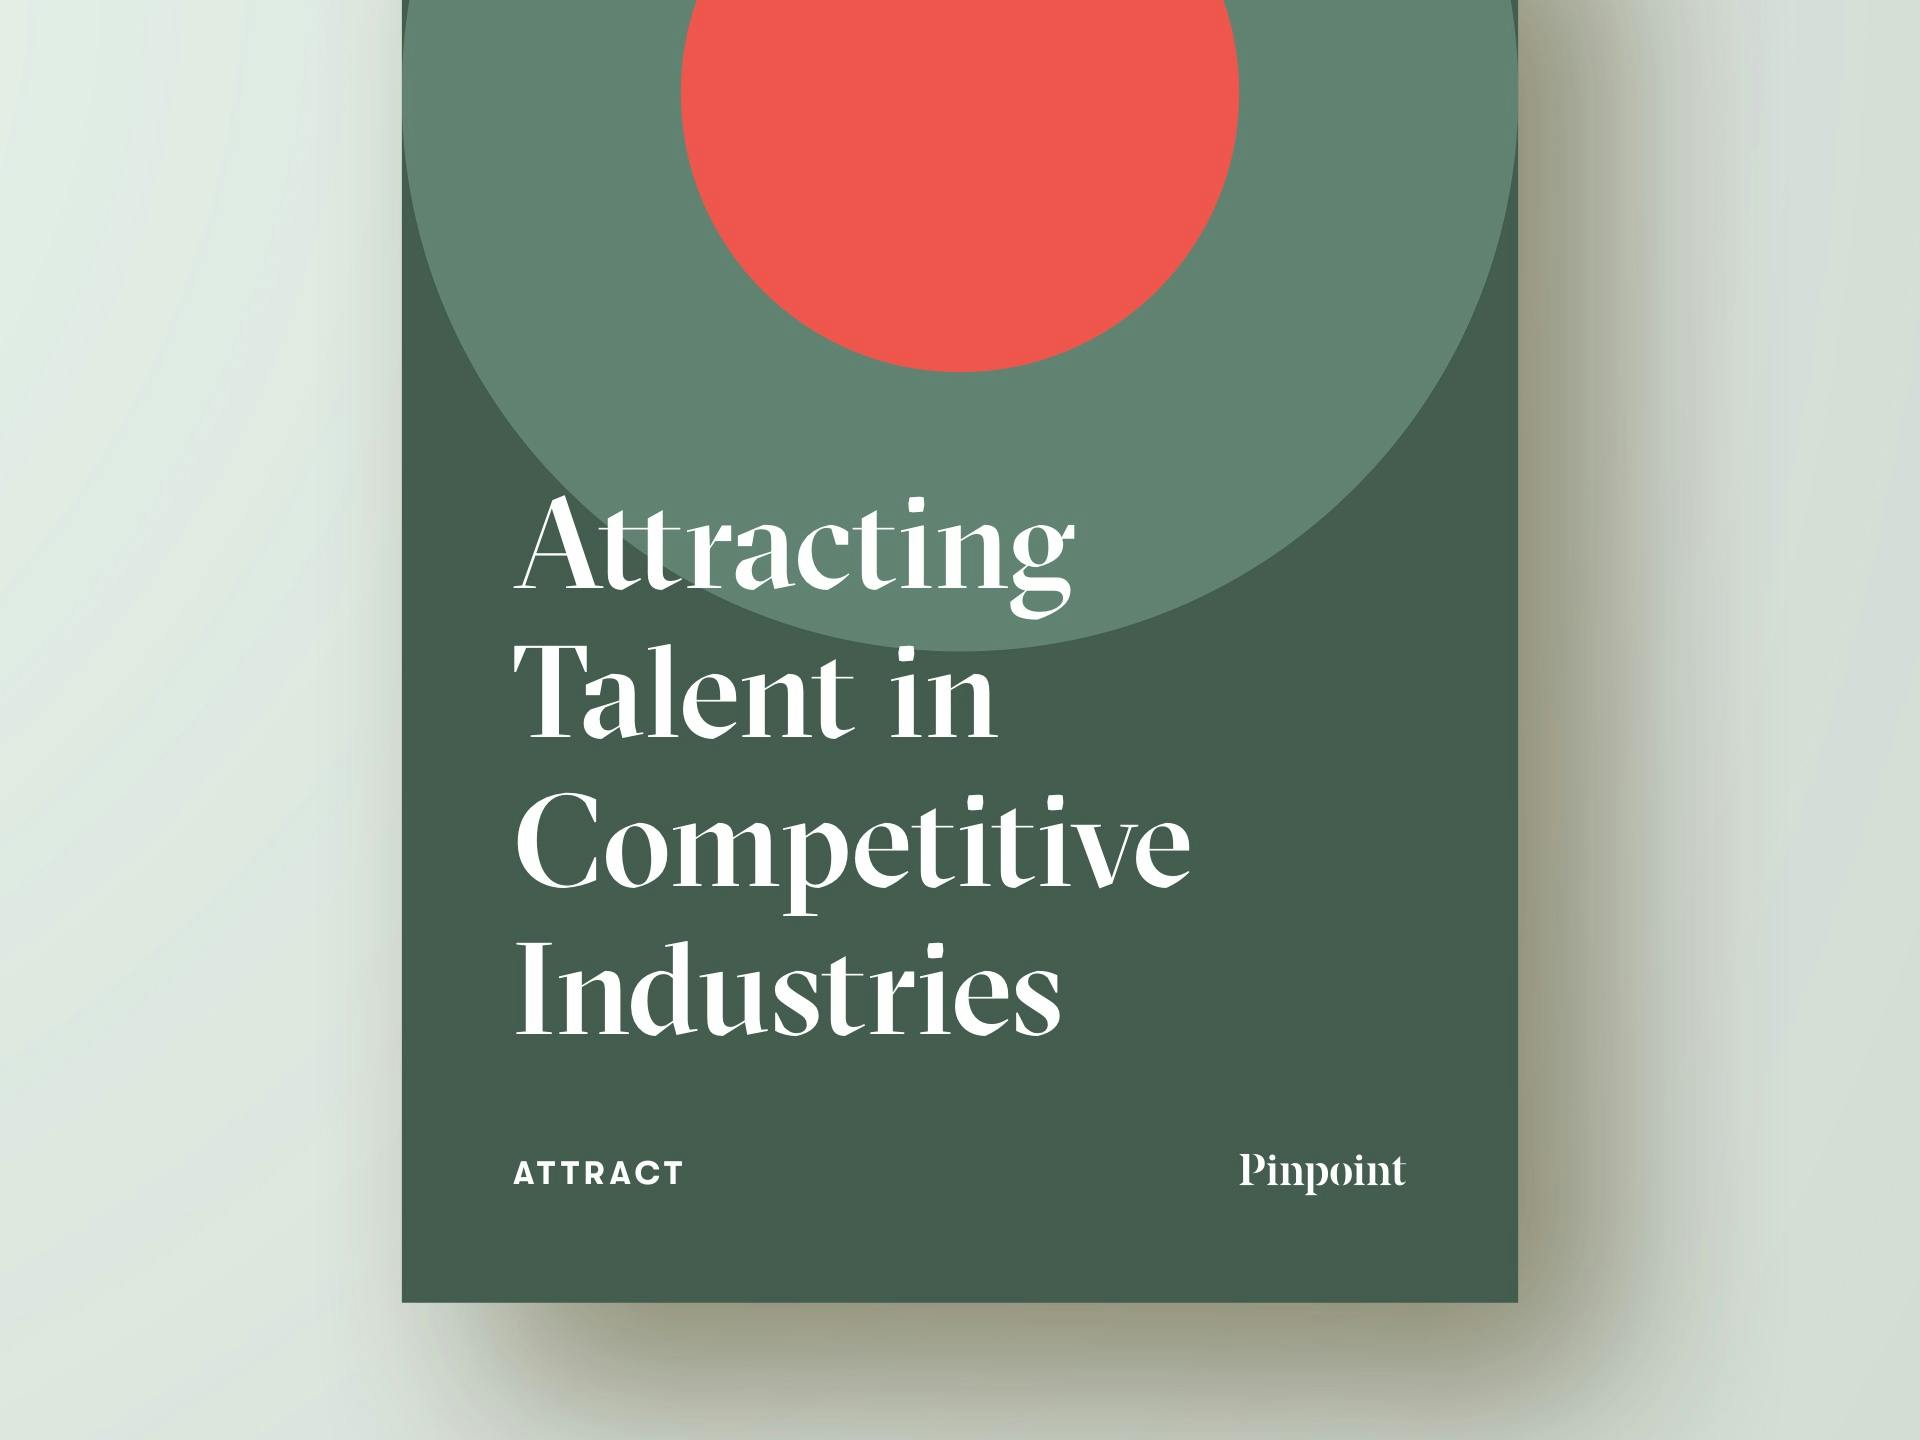 How to attract talent in competitive industries